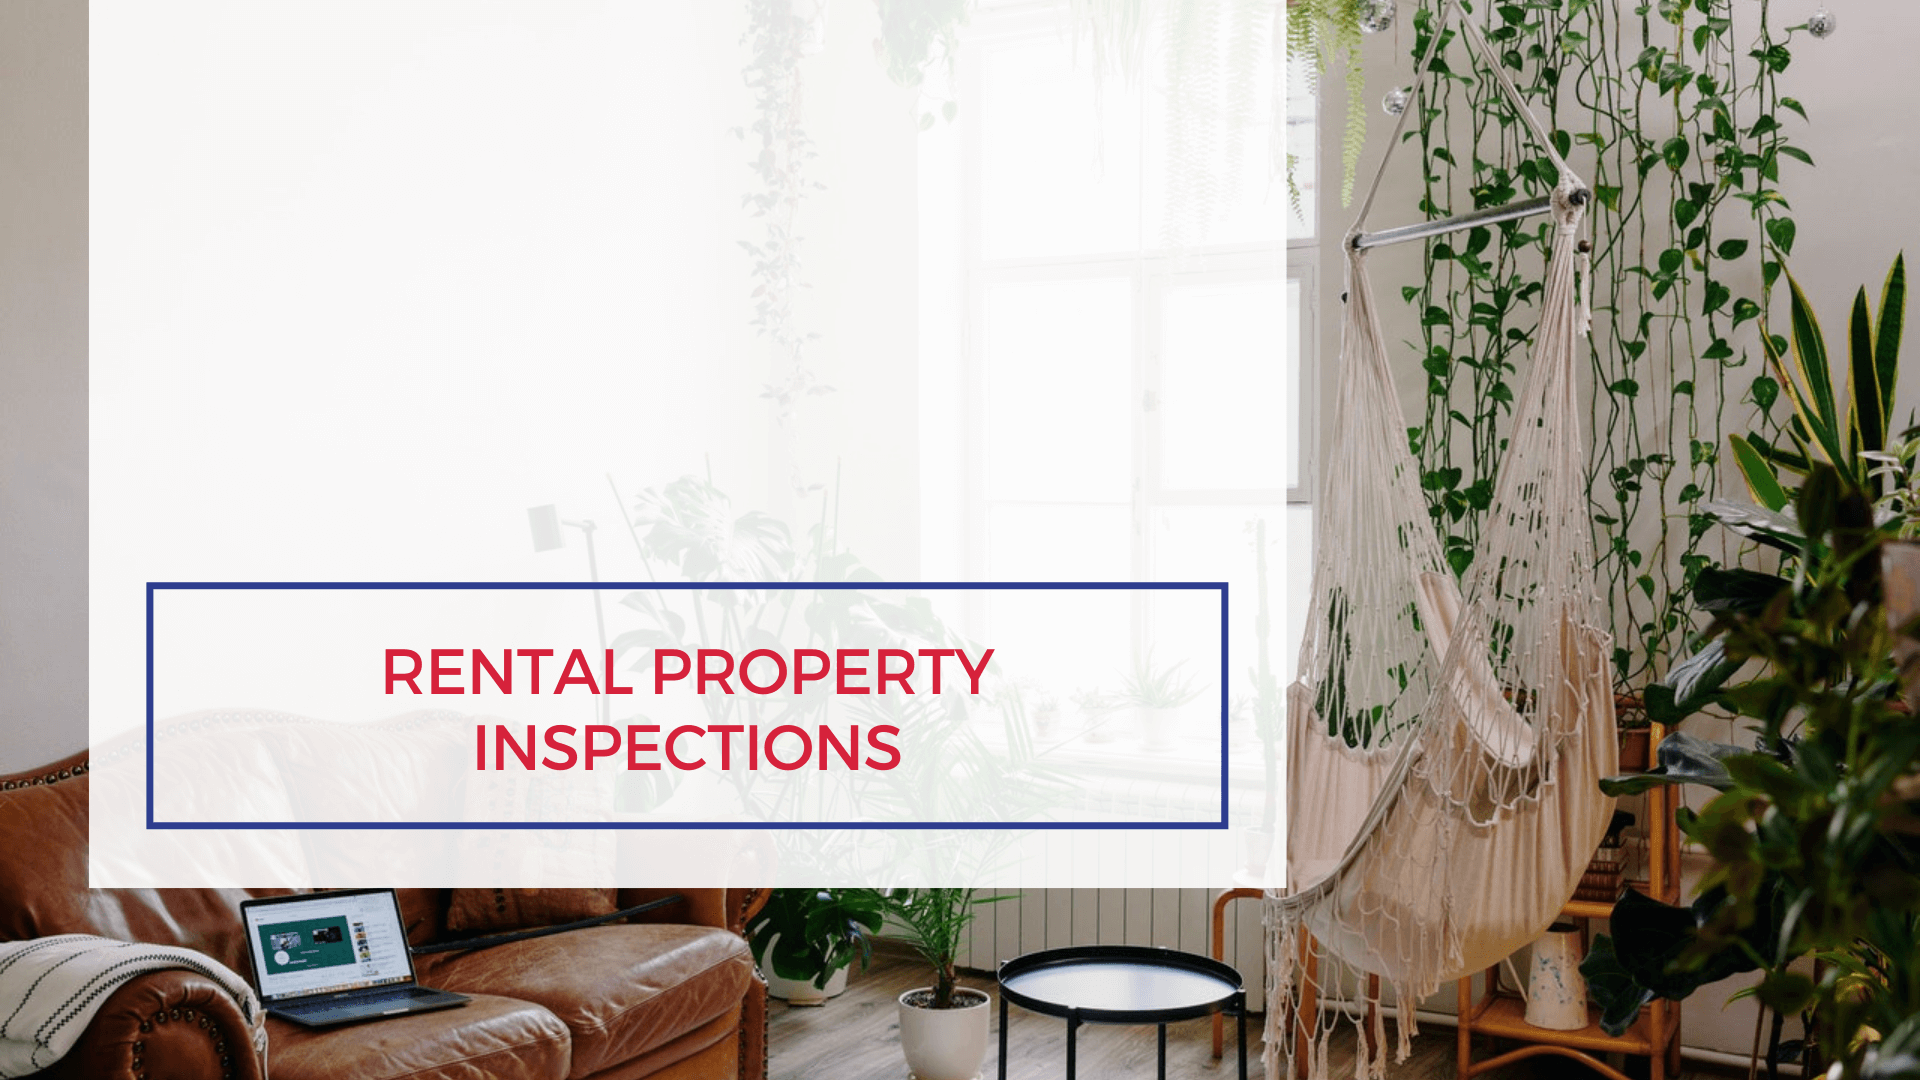 Rental Property Inspections: 5 Things to Always Look For | Orlando Property Management